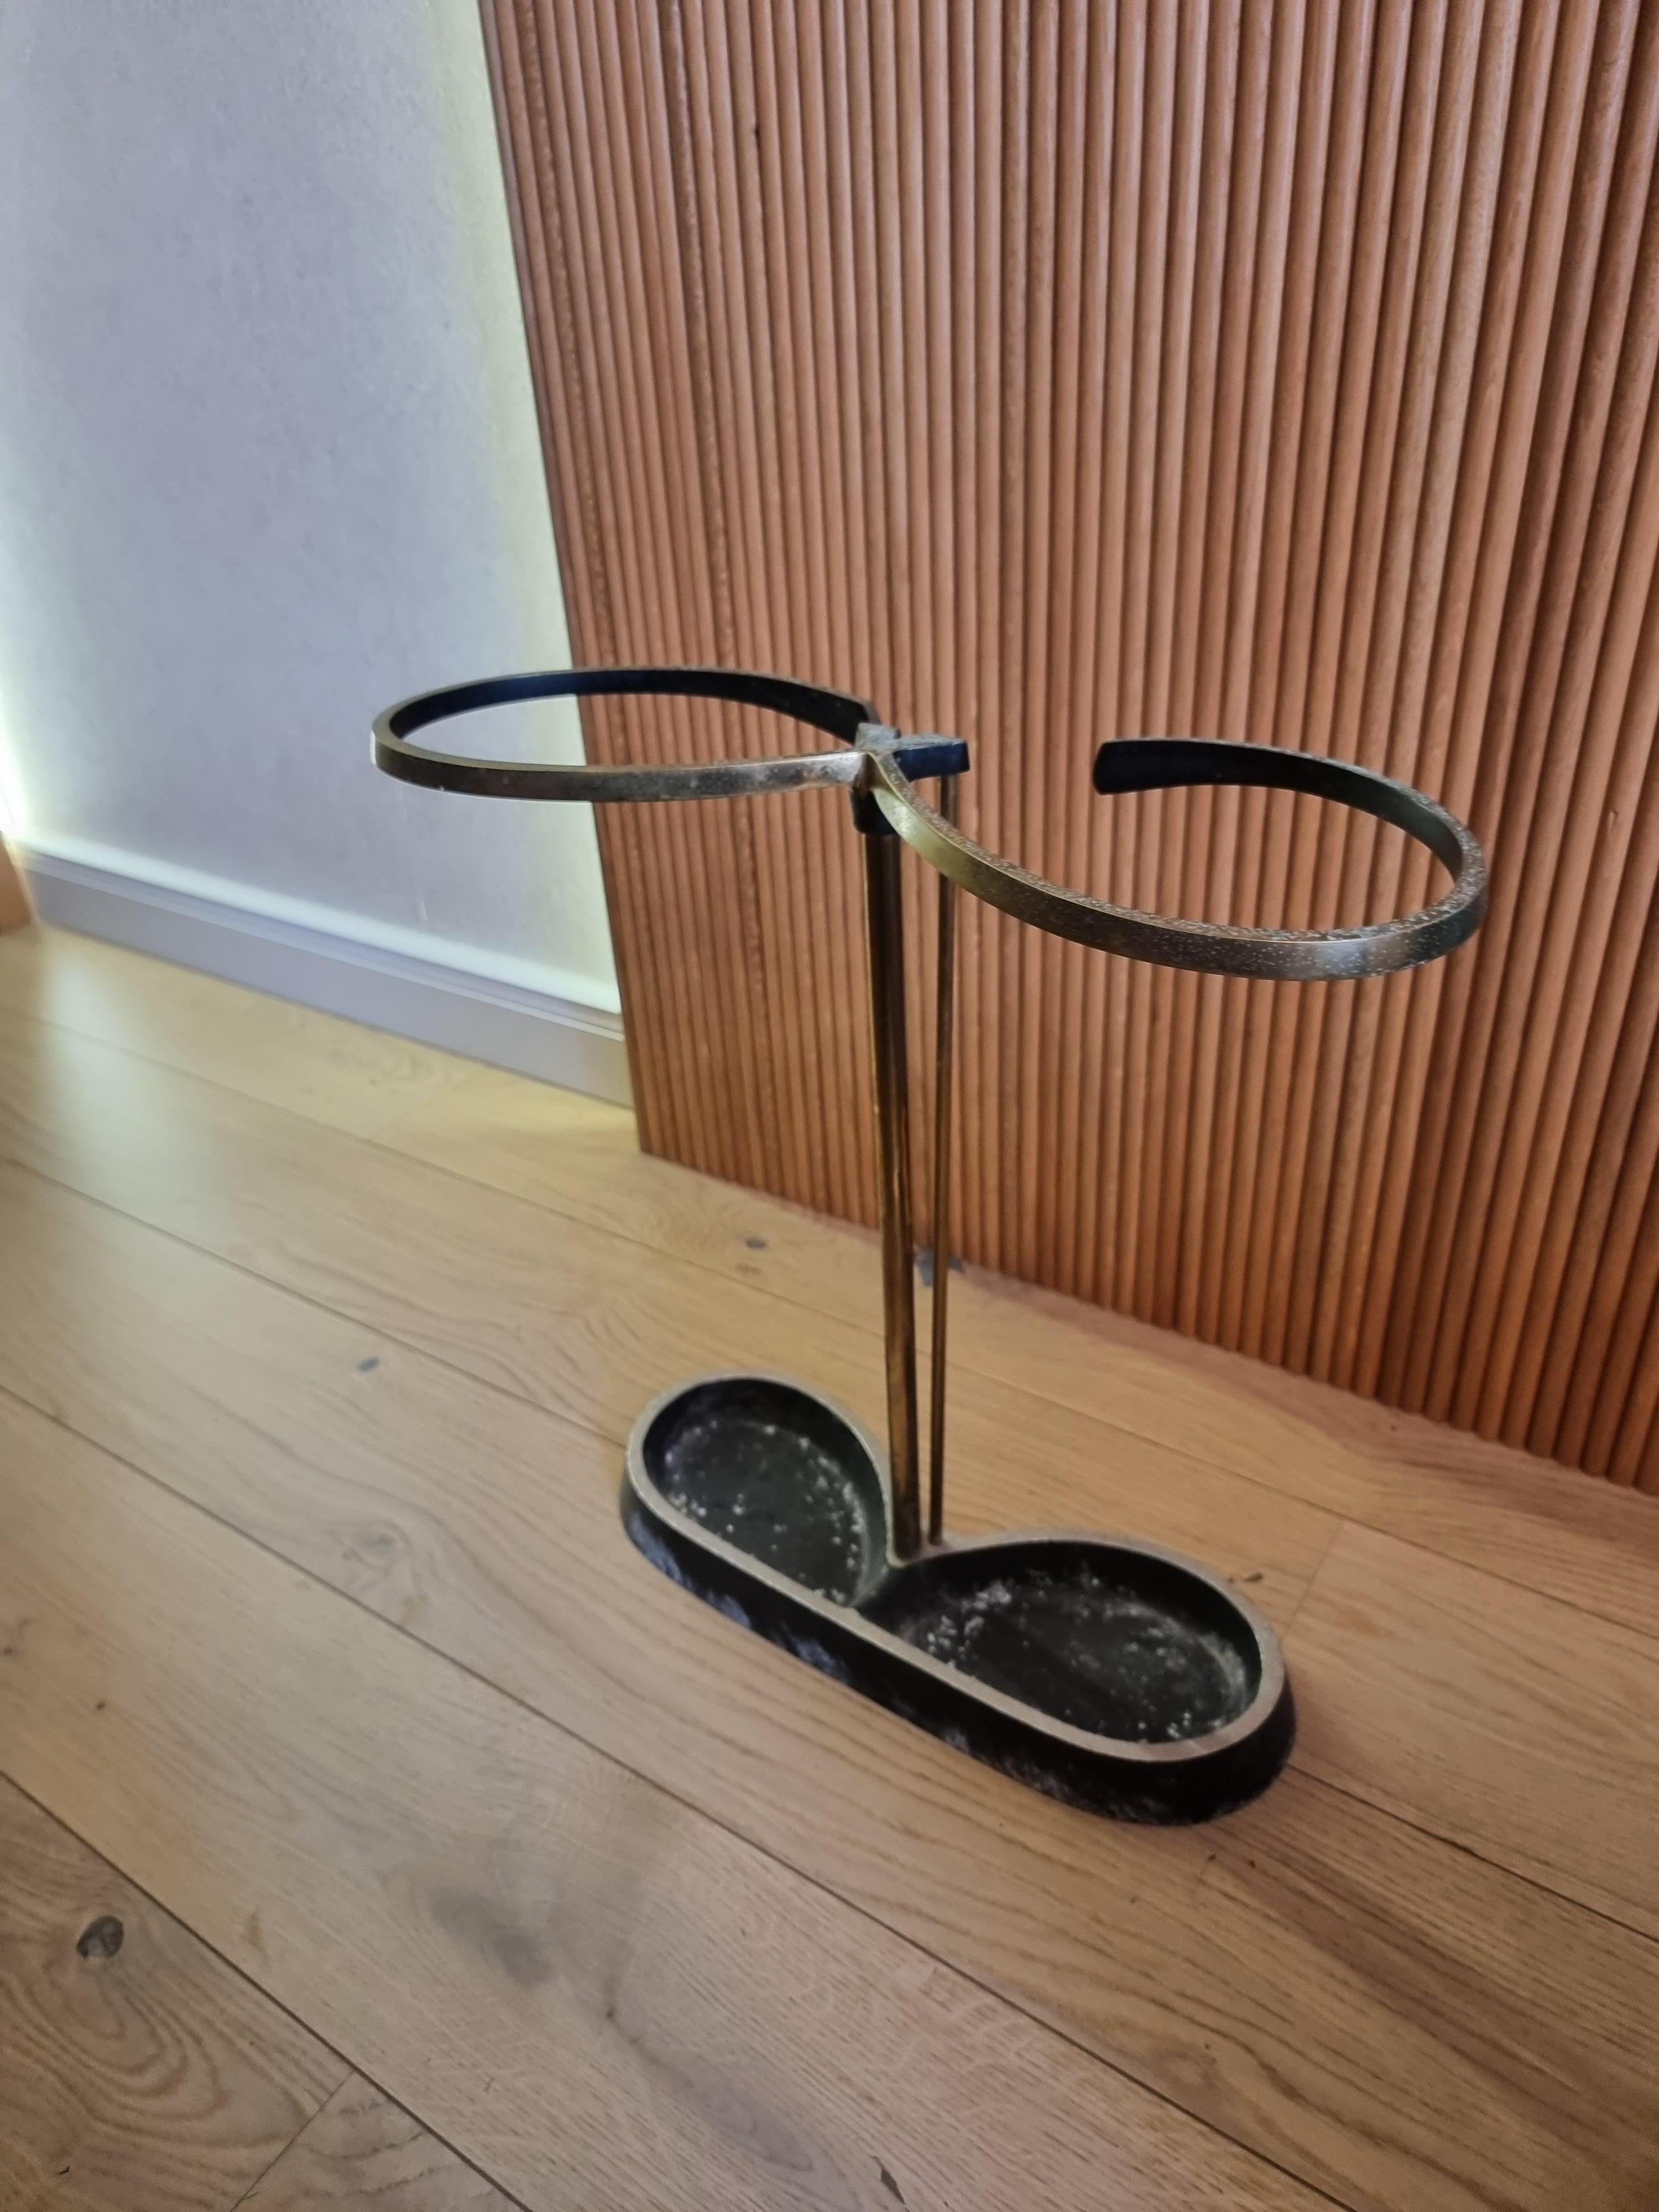 Sculptural modernist / Bauhaus-style umbrella stand in brass and base in aluminium. Attributed to Artes, H. & H. Seefried, Steppach. Austria, mid-1900s. 


Patina, normal signs of age and wear. No structural damage, stabile. This item can be